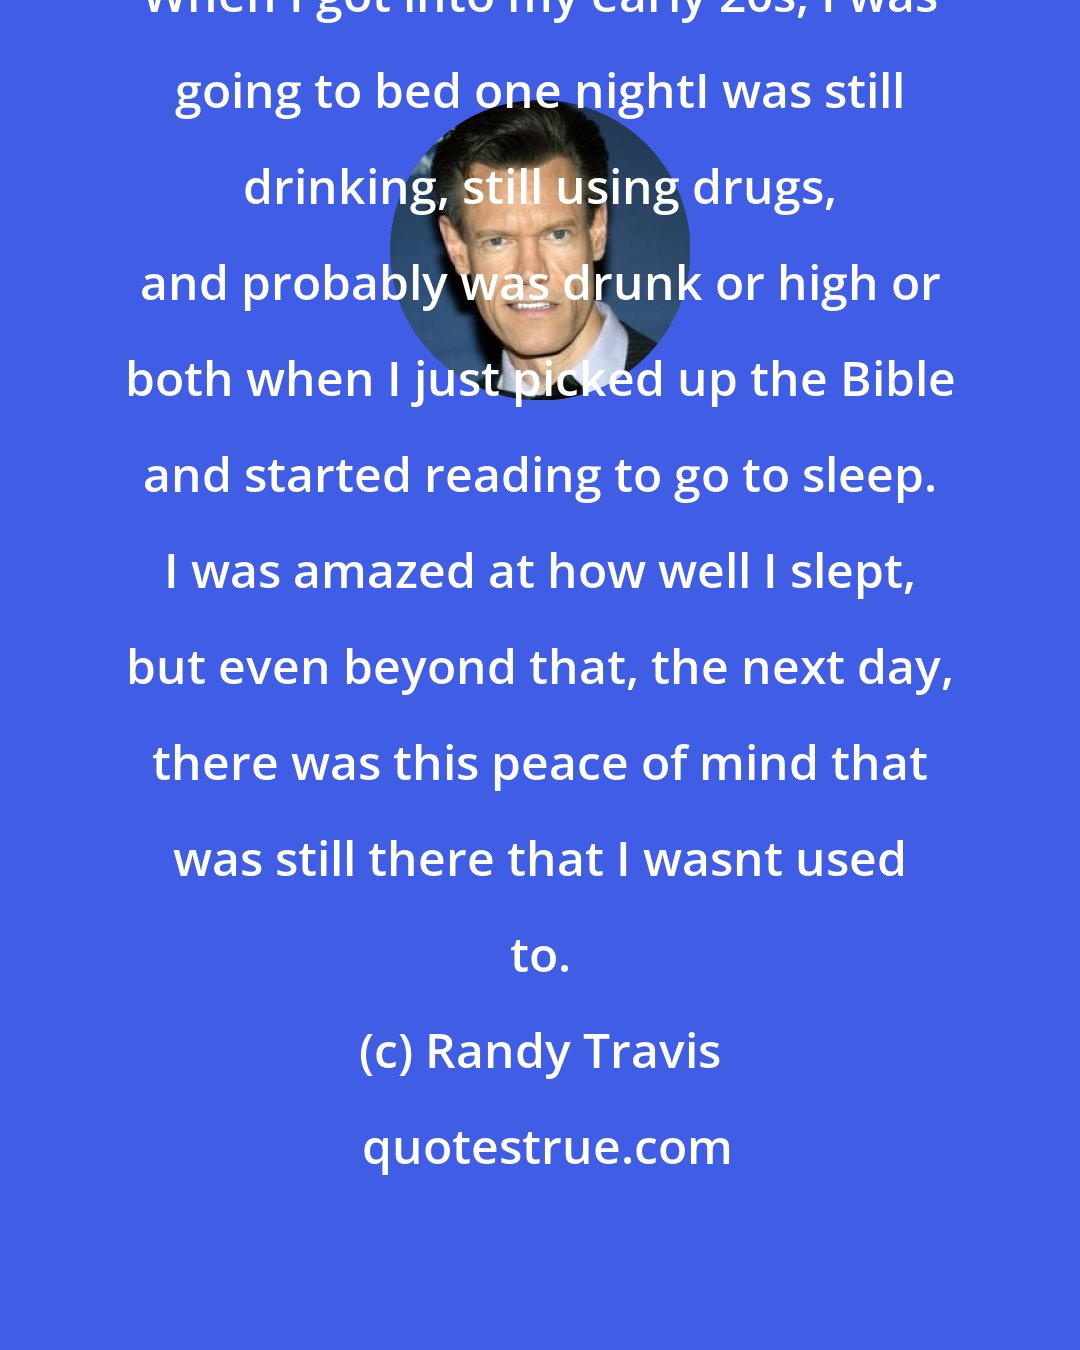 Randy Travis: When I got into my early 20s, I was going to bed one nightI was still drinking, still using drugs, and probably was drunk or high or both when I just picked up the Bible and started reading to go to sleep. I was amazed at how well I slept, but even beyond that, the next day, there was this peace of mind that was still there that I wasnt used to.